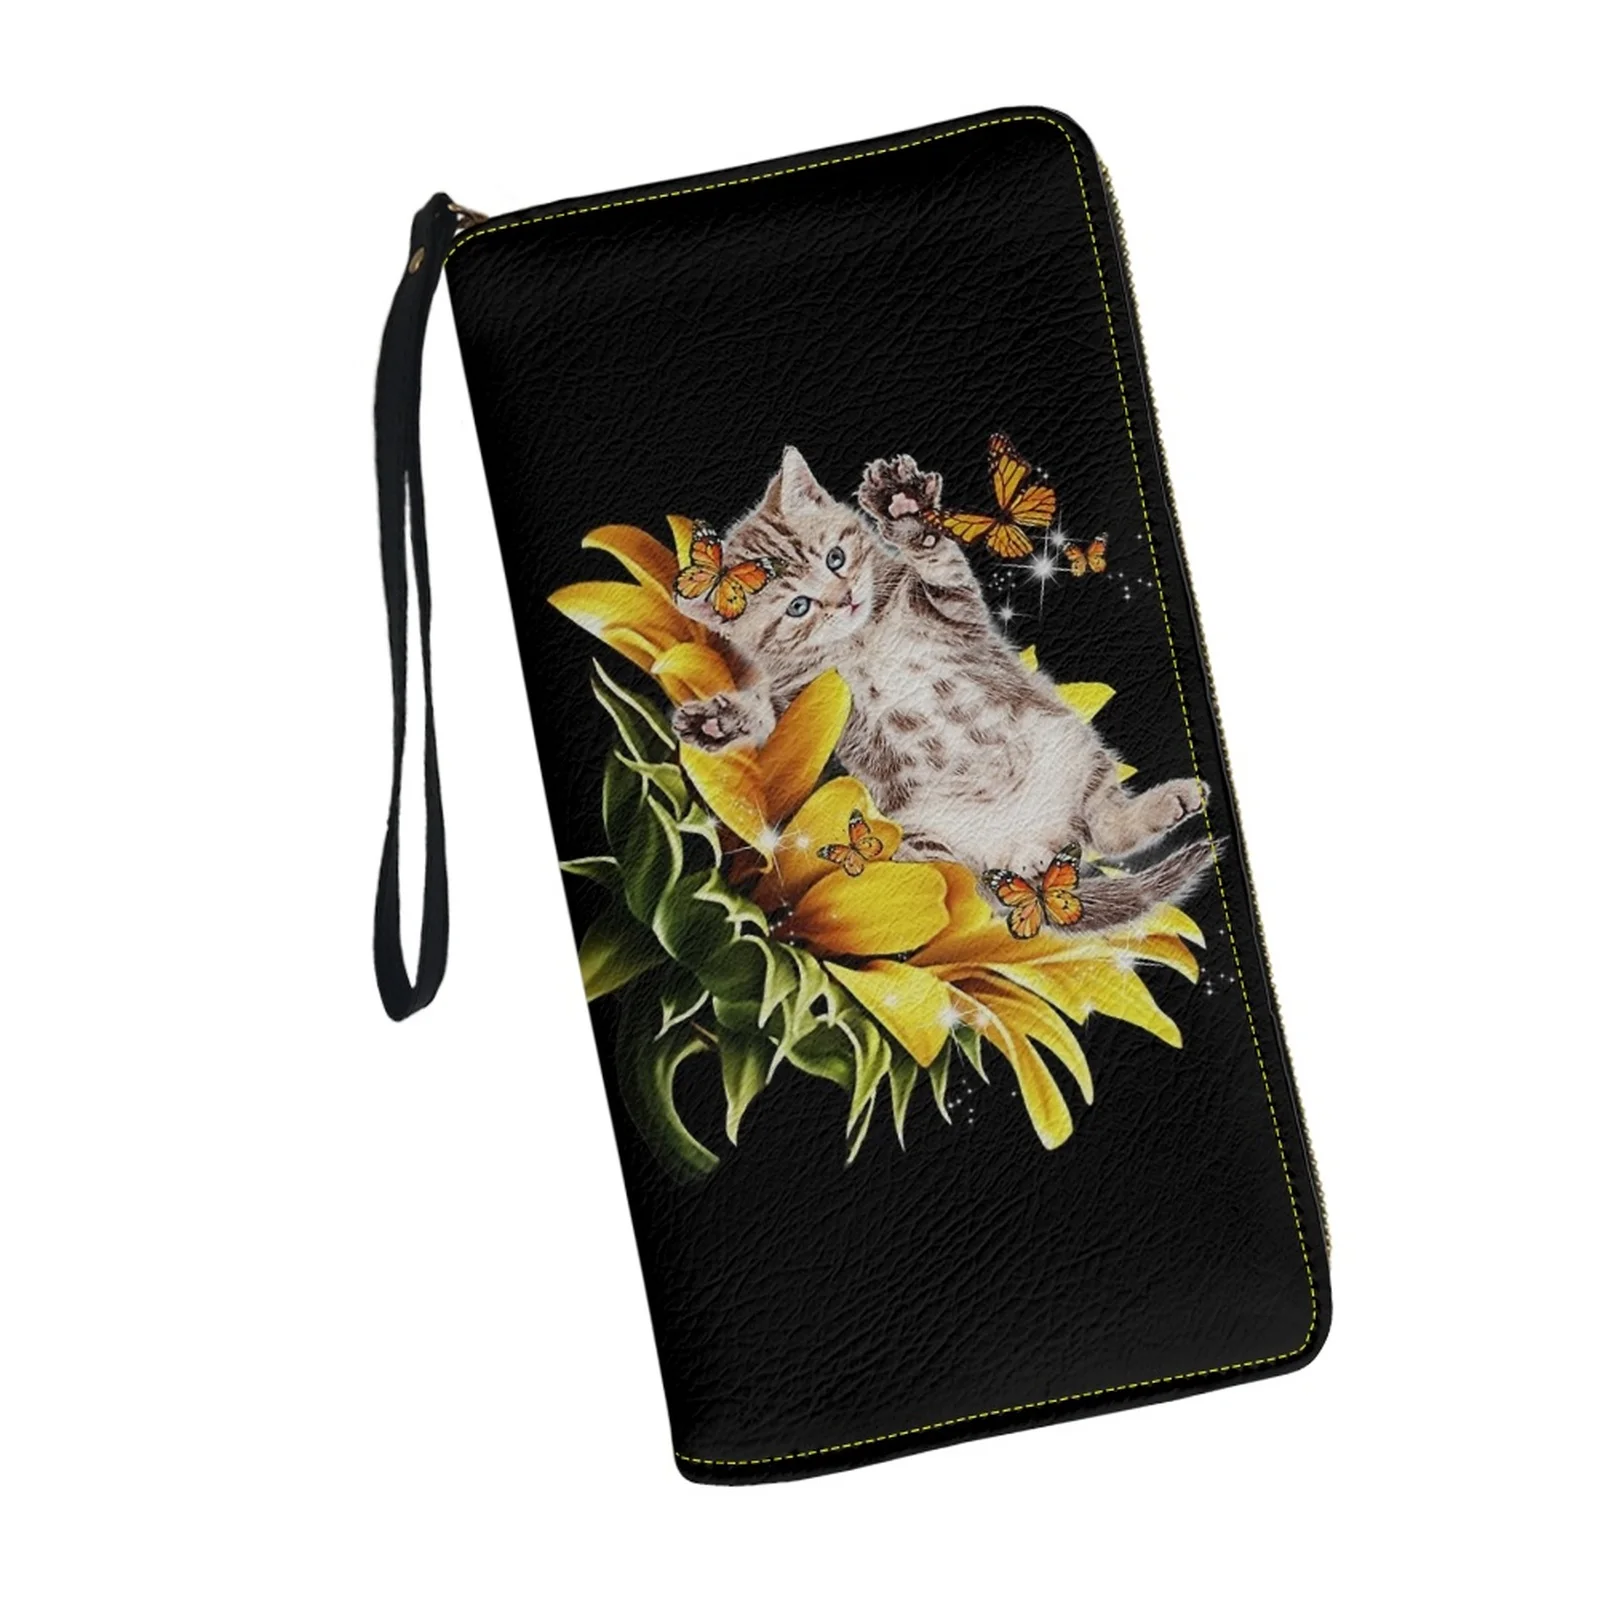 Belidome Funny Cat Wristlet Wallets for Womens Casual PU Leather Long Purse RFID Blocking Card Holder Clutch Bag Lady Handbags